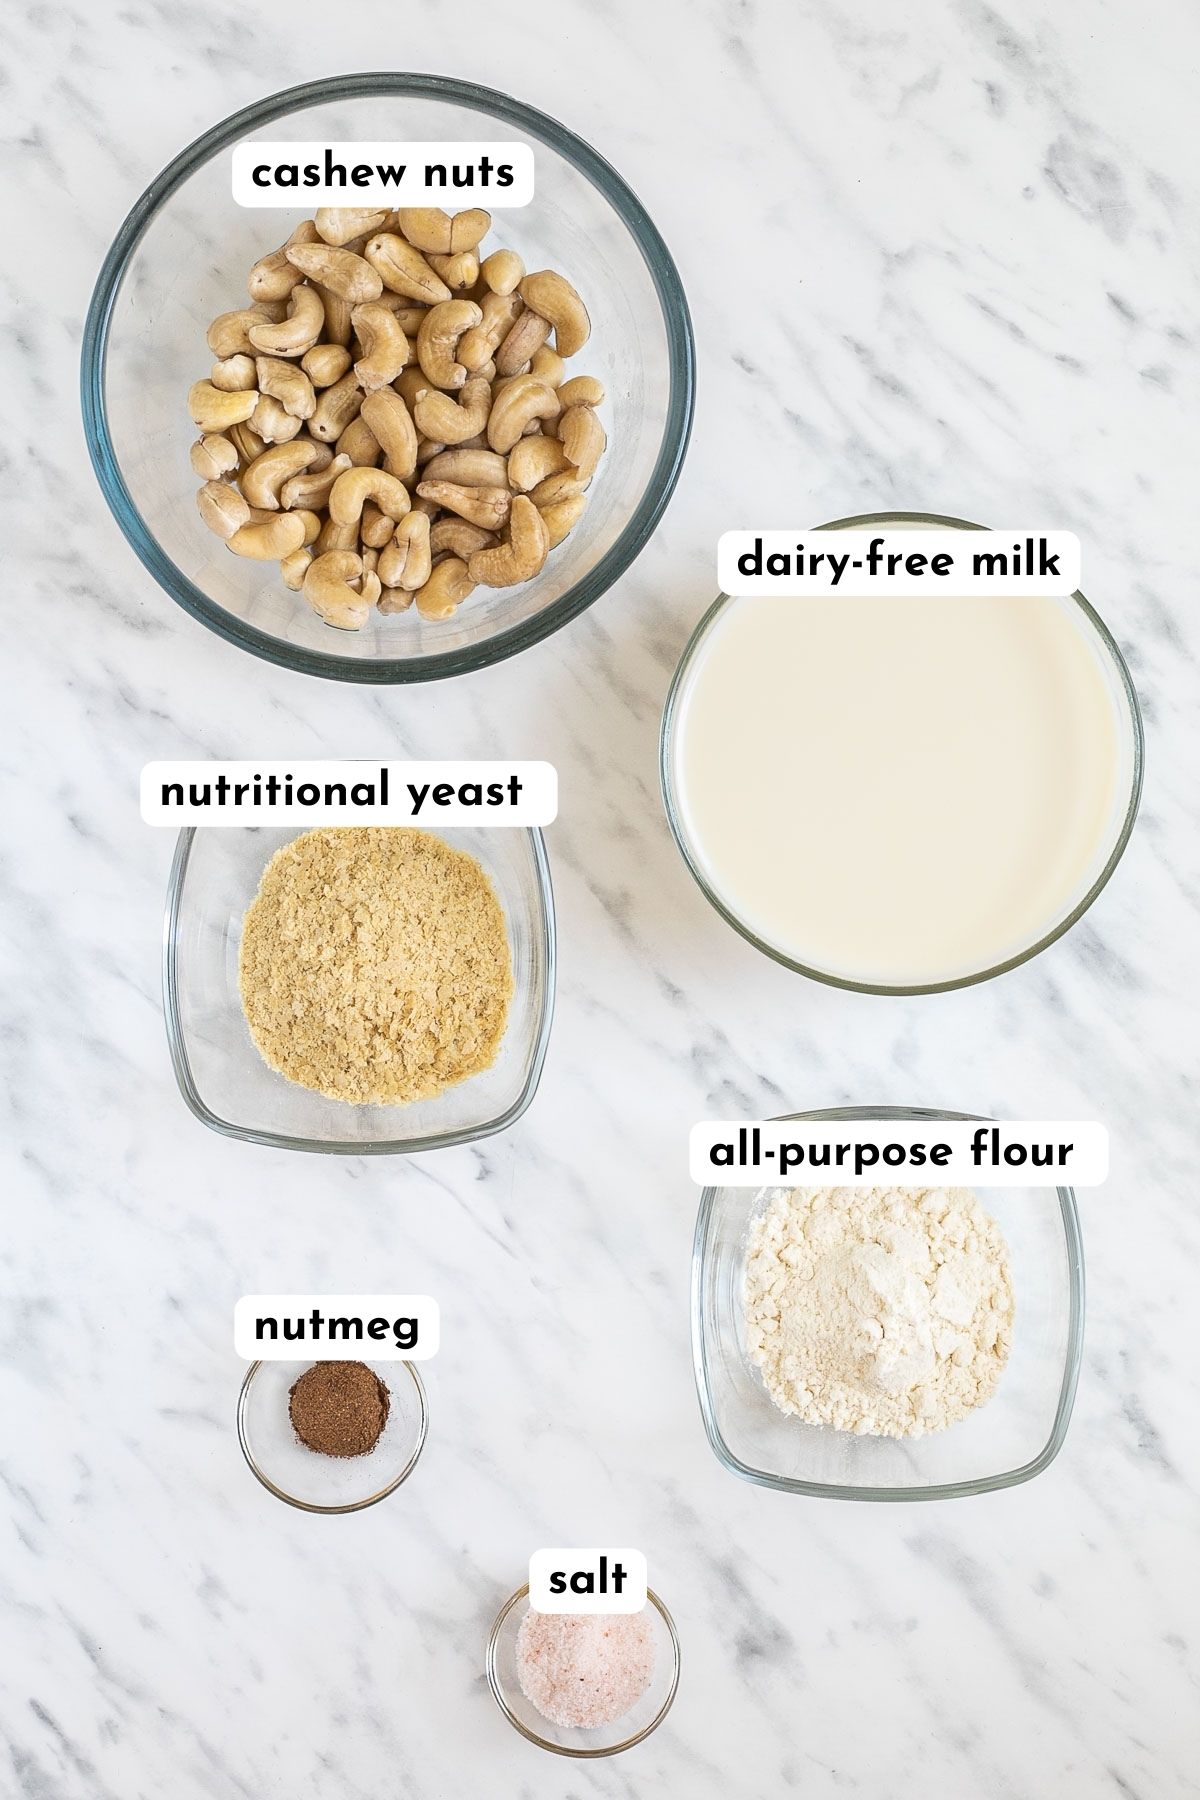 Ingredients of vegan white sauce in small glass bowls like cashew nuts, milk, yellow flakes, flour, nutmeg, and salt